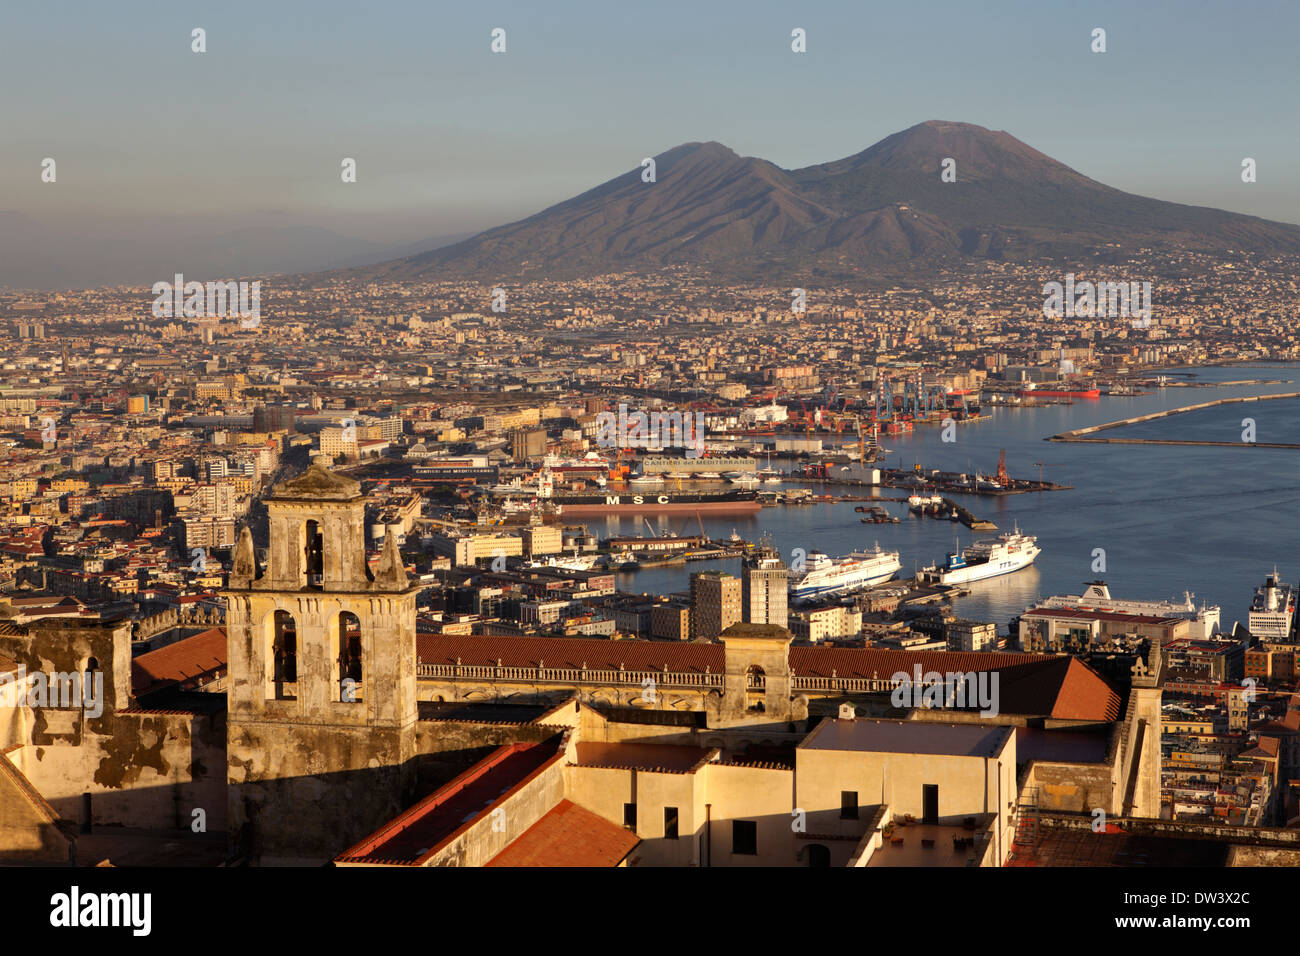 View of the Gulf of Naples and Mount Vesuvius in the distance, Naples, Italy Stock Photo